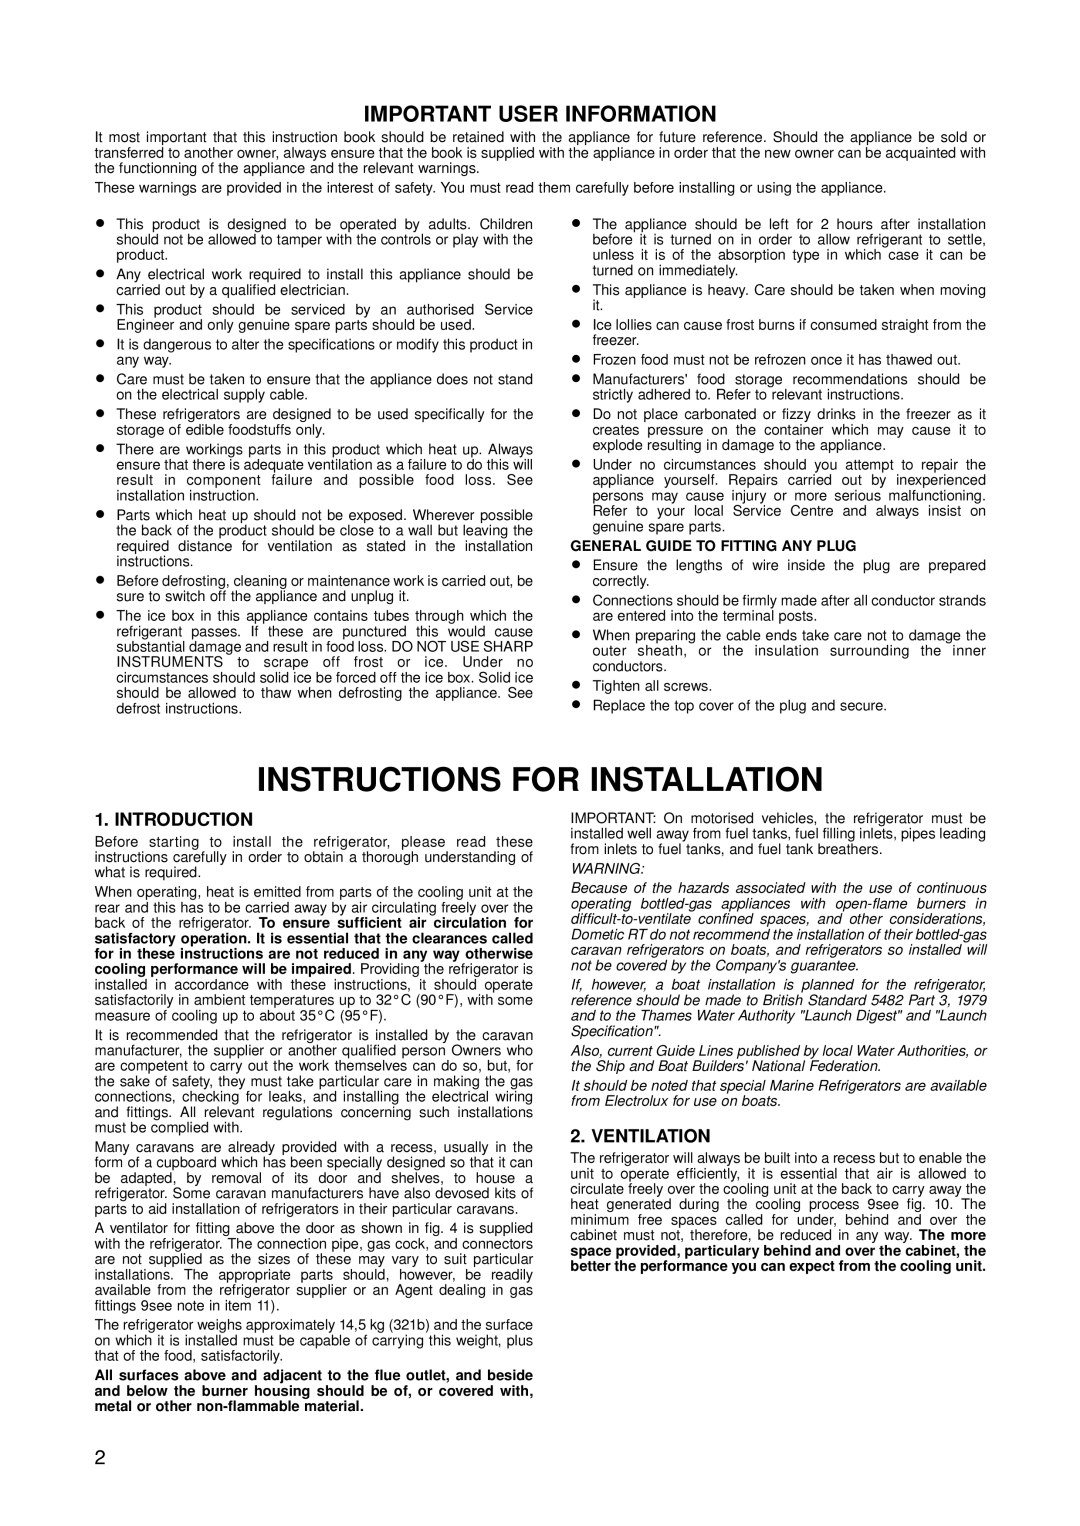 Dometic RM 123E, RM 122F Instructions For Installation, Important User Information, Introduction, Ventilation 